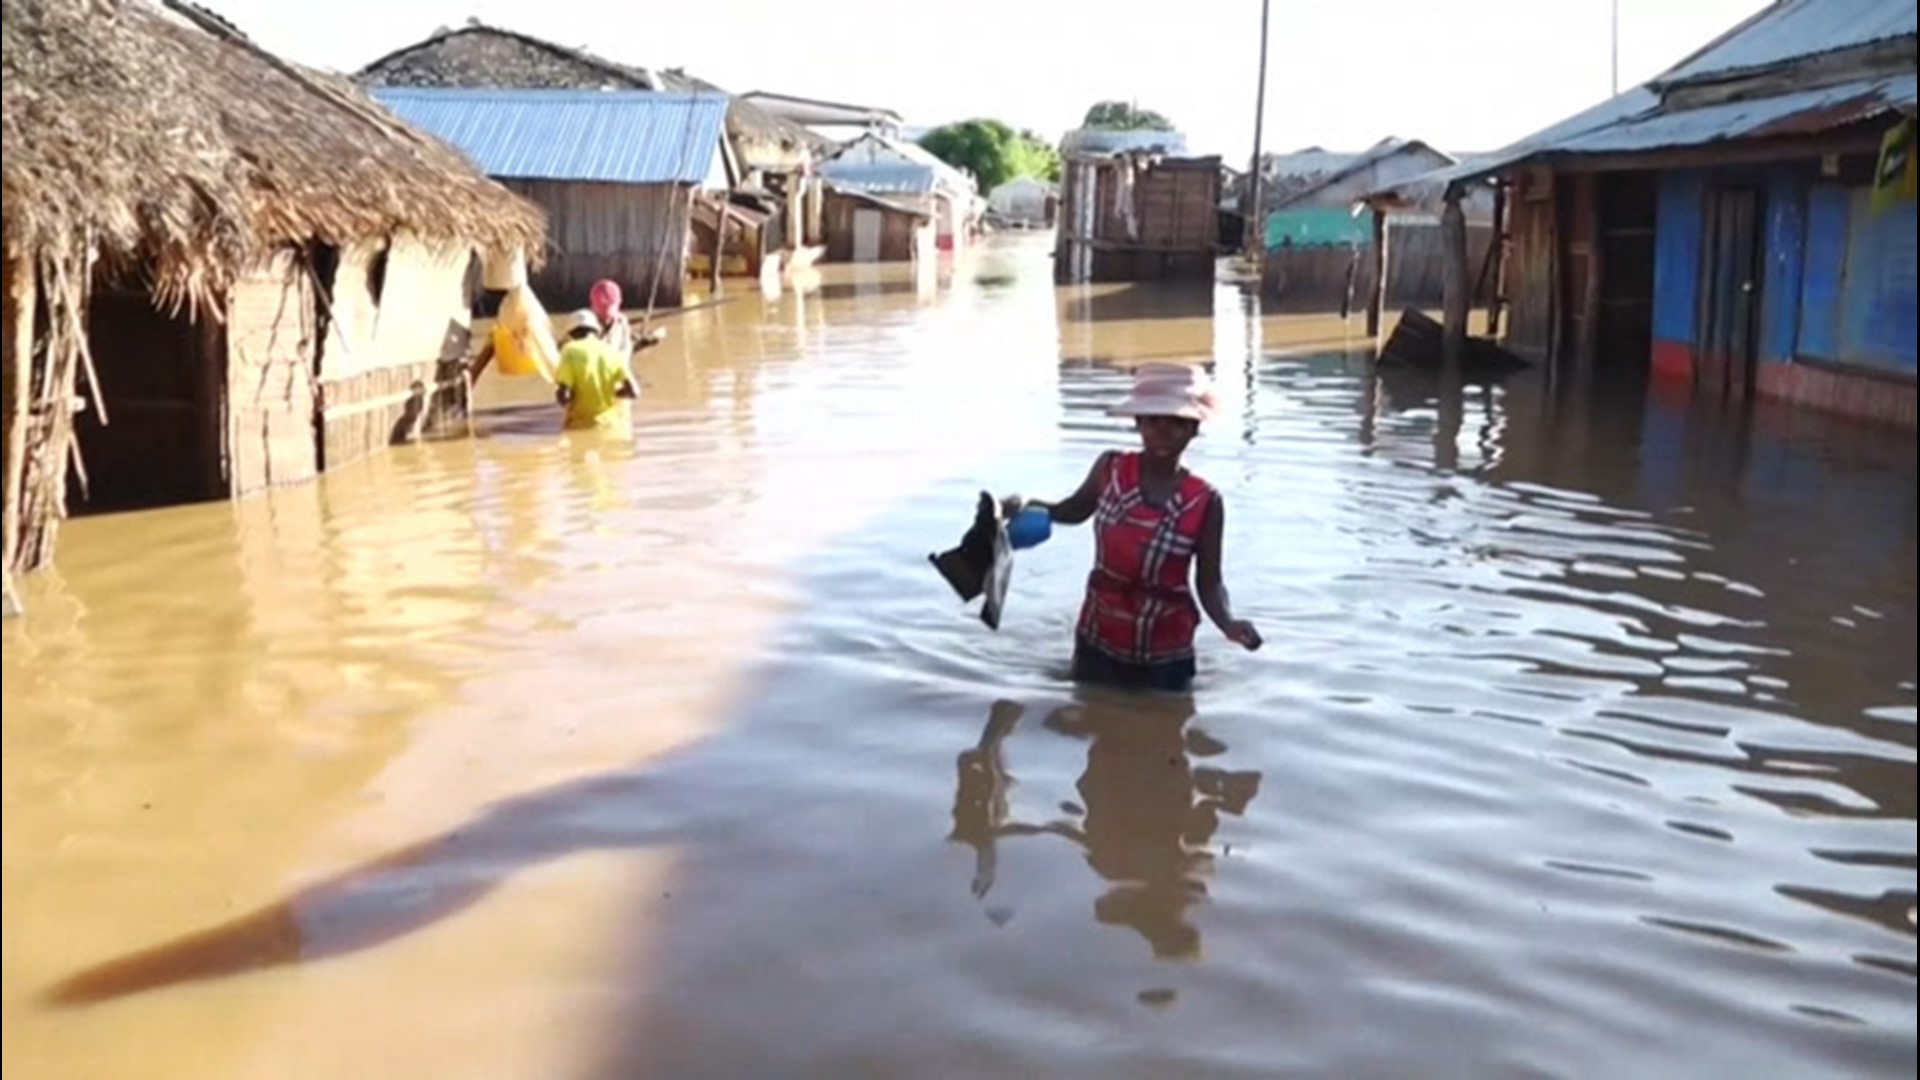 The streets of Marovoay, Madagascar, were buried under several feet of water on Jan. 26, after nearly a week of heavy rain soaked the area.